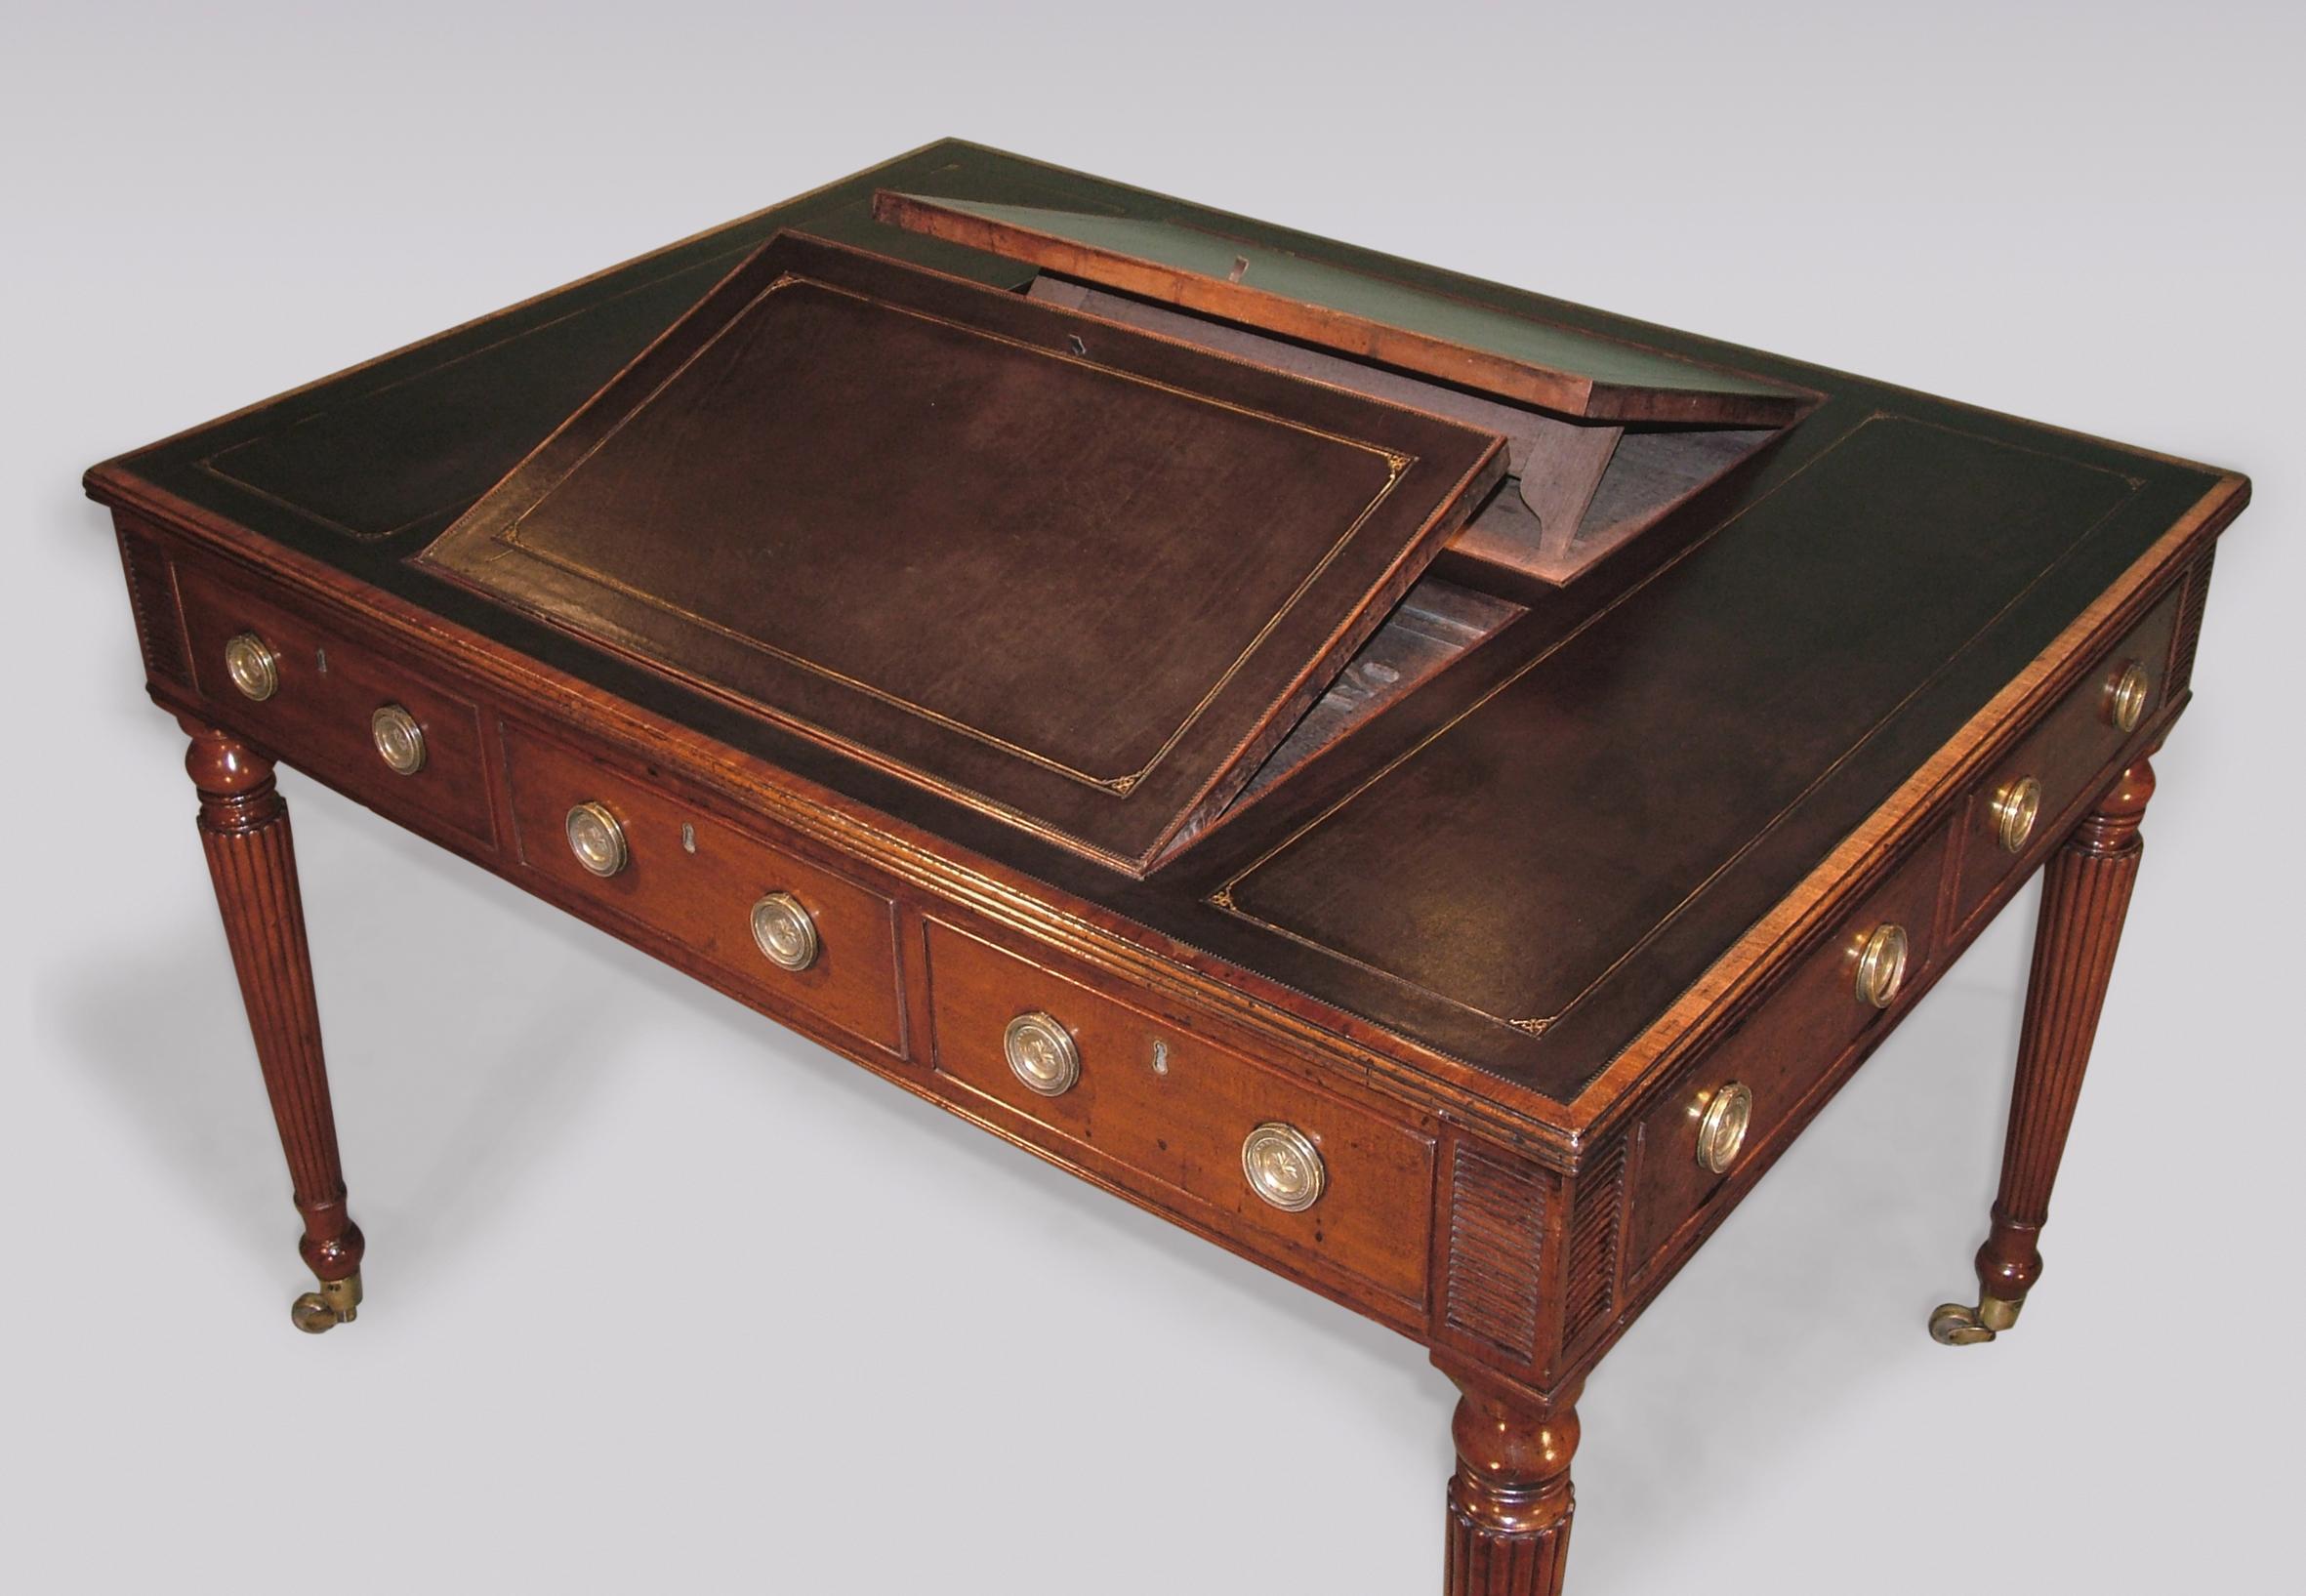 A fine early 19th century Regency period six-drawer mahogany writing table having reeded edged gilt-tooled leather top with two inset reading stands above cockbeaded drawers flanked by “match-strike” reeded panels, supported on baluster turned